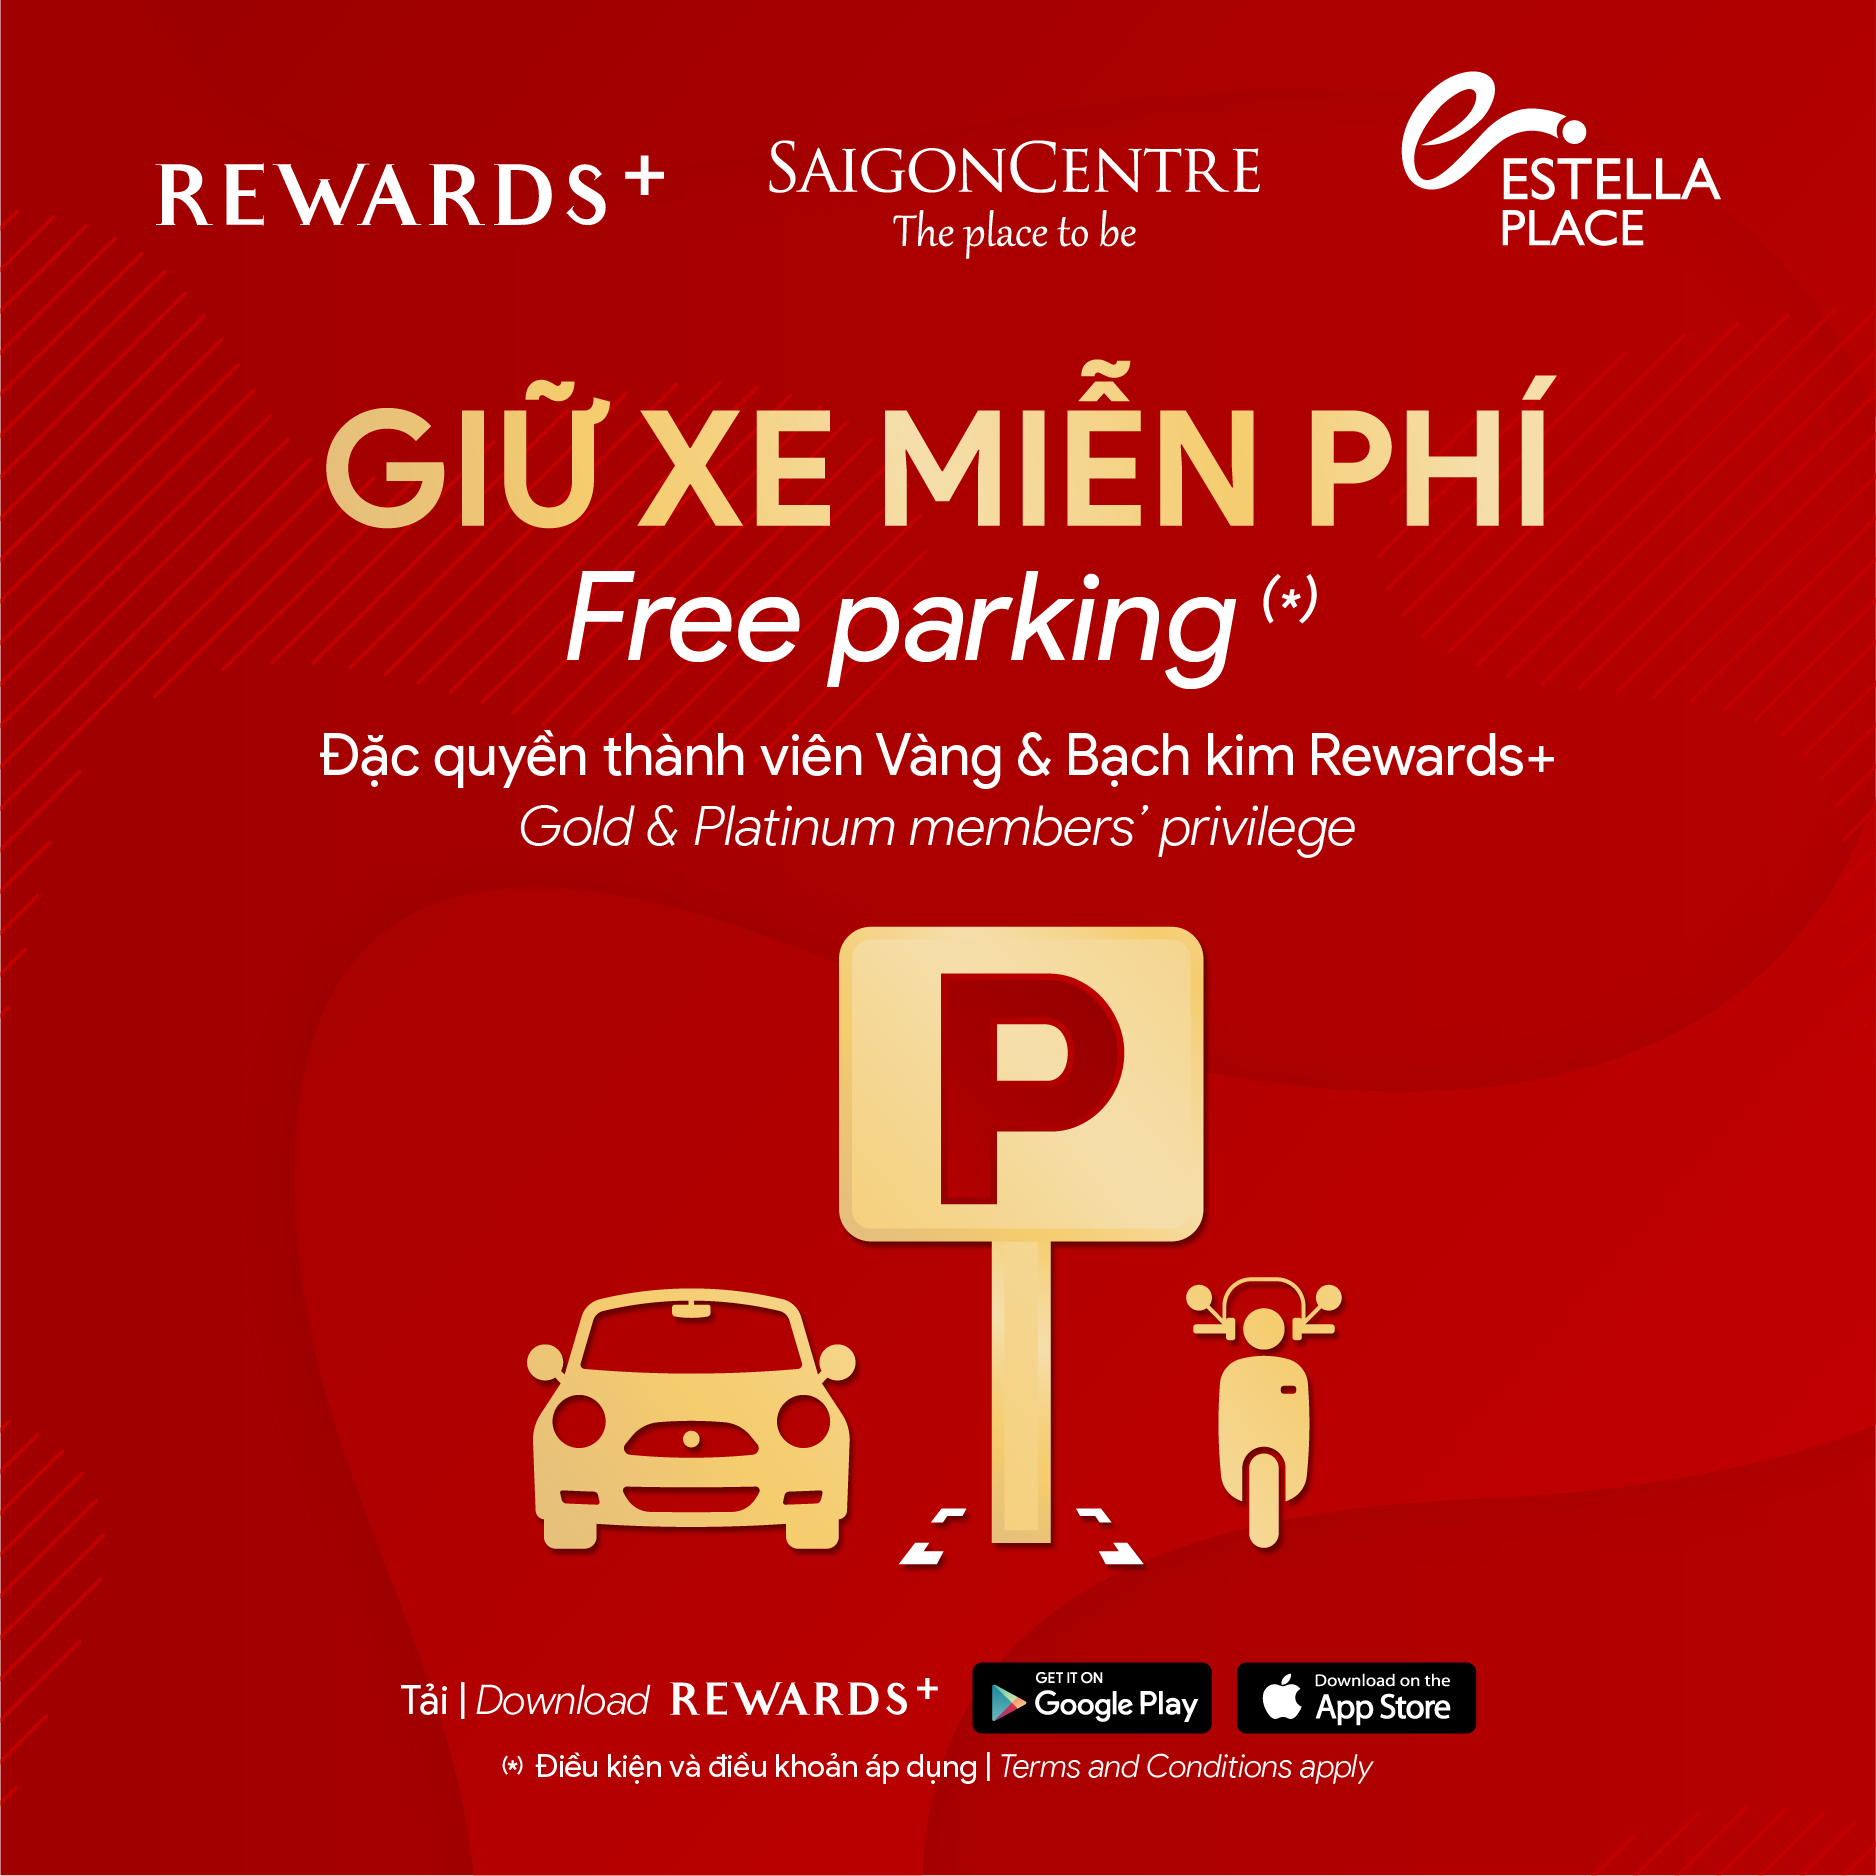 FREE PARKING FOR REWARDS+ GOLD AND PLATINUM MEMBERS